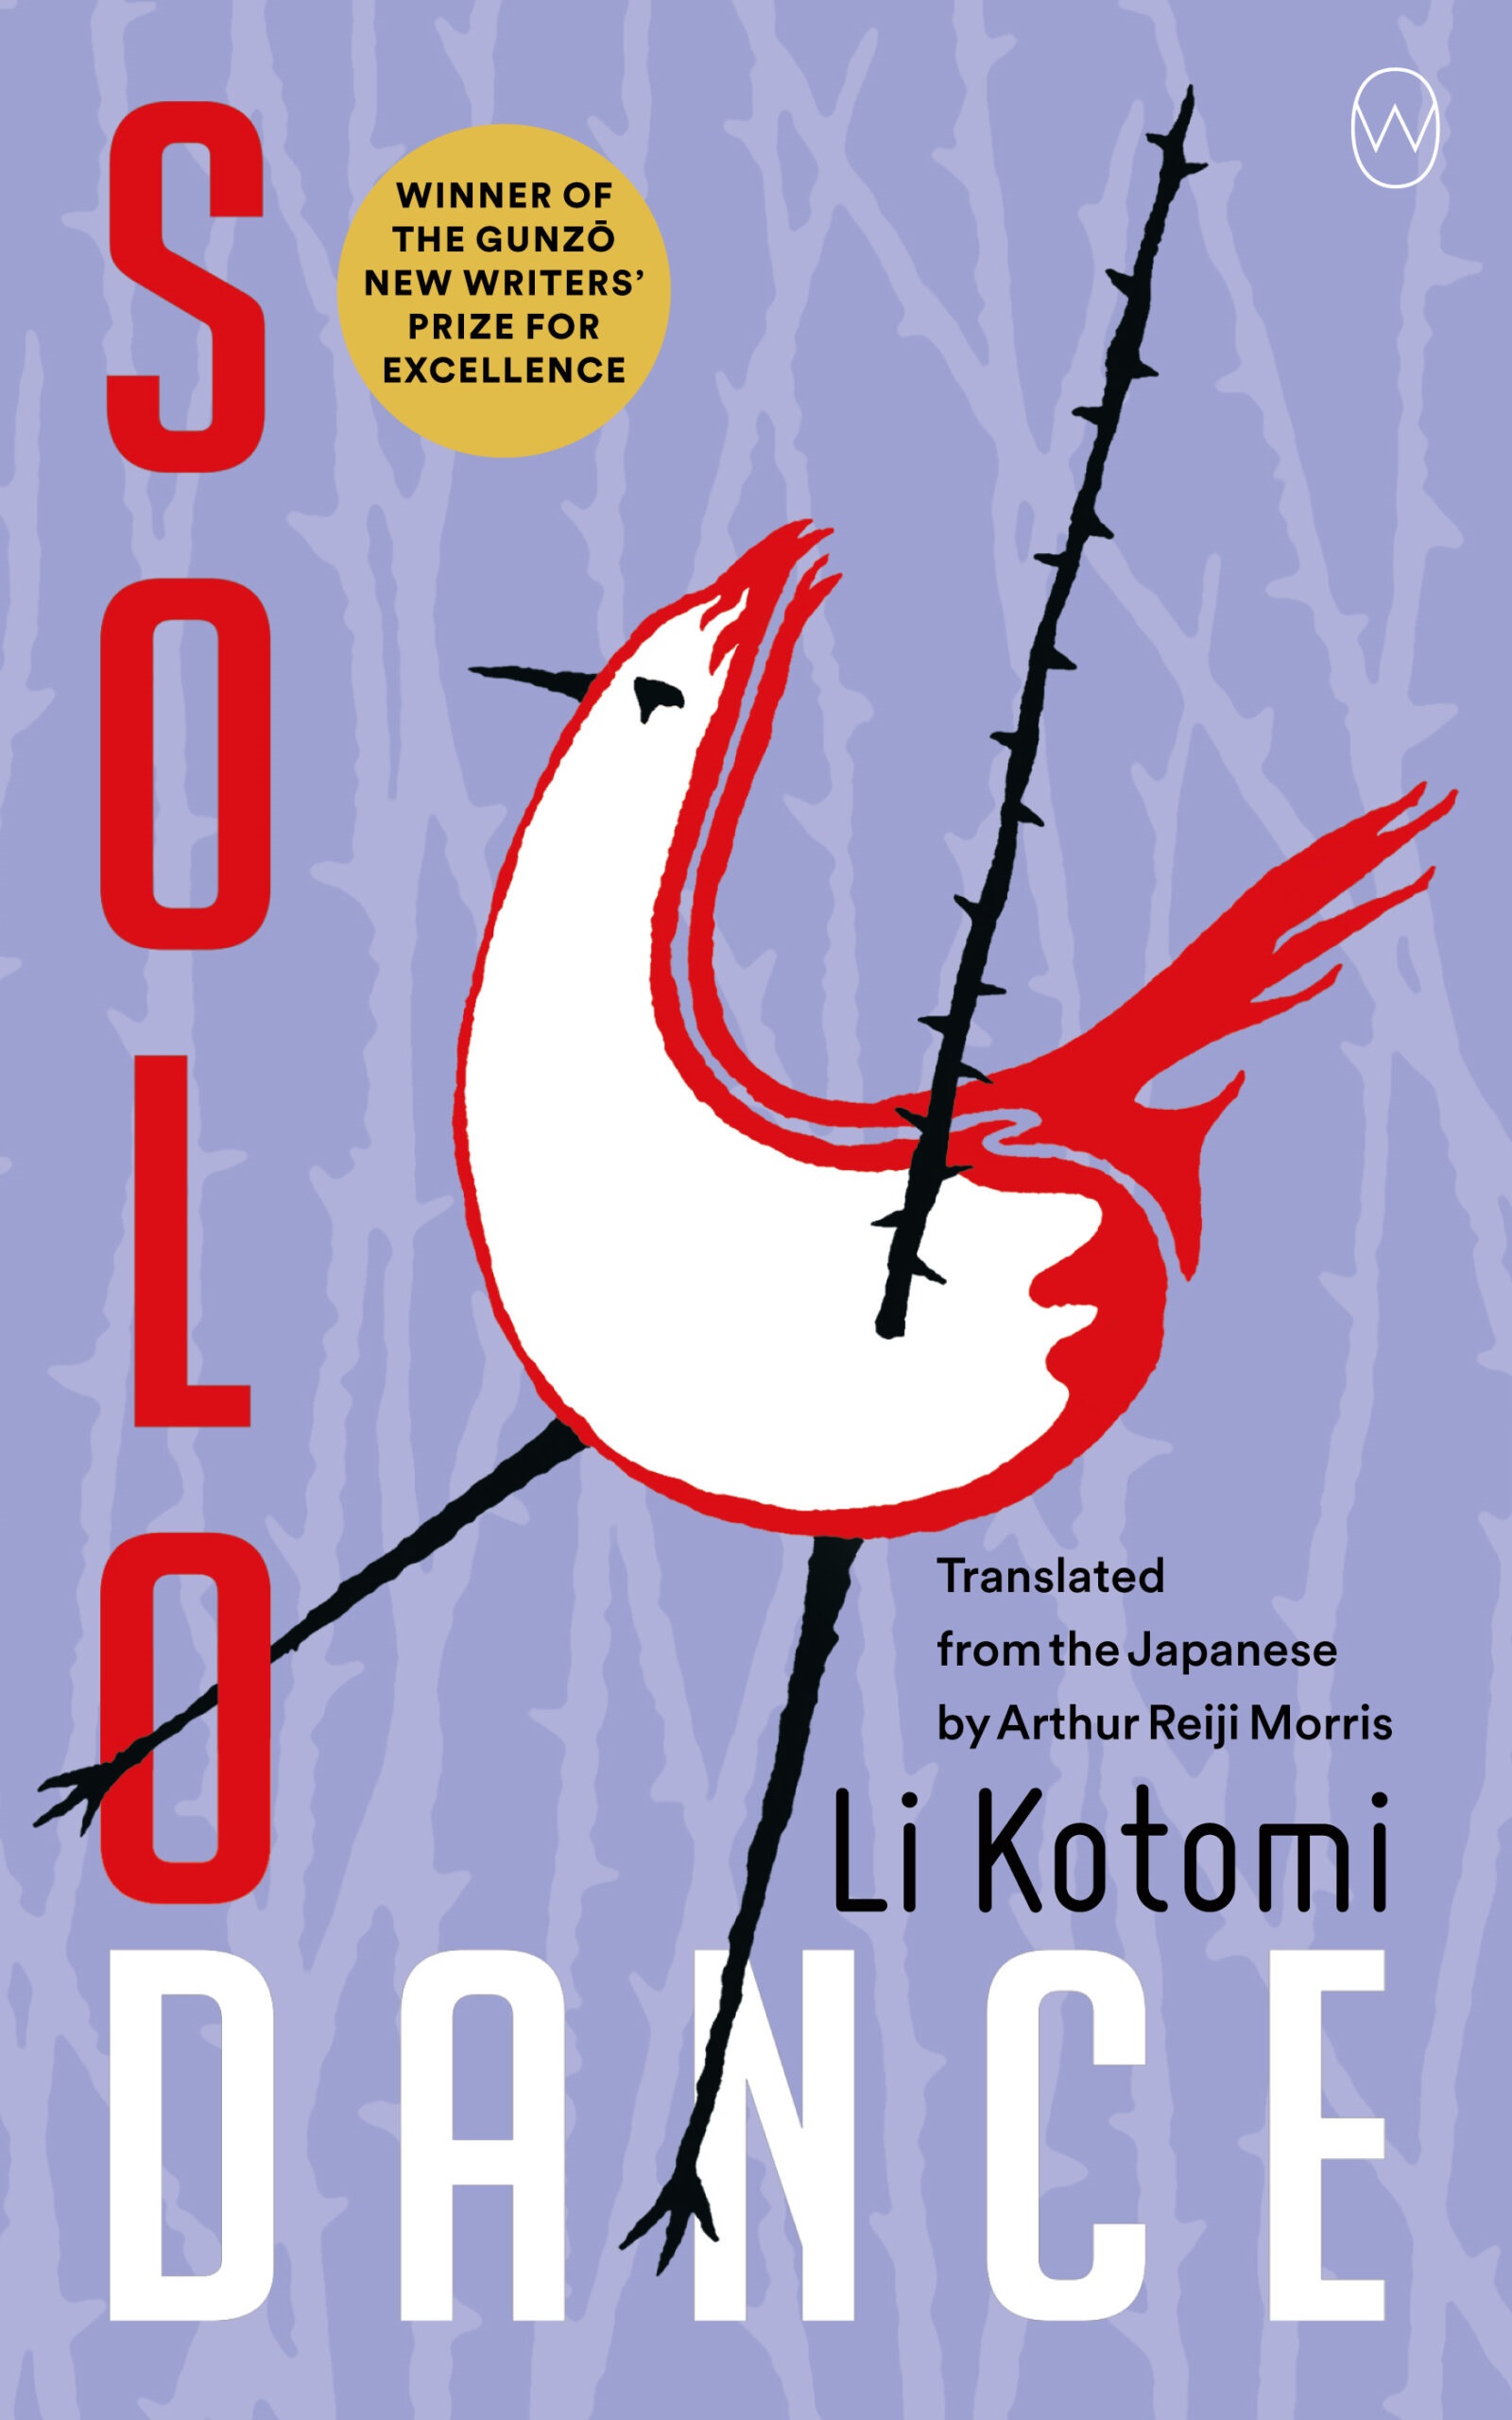 Cover of Solo Dance by Li Kotomi, featuring an illustration of a bird impaled on a stick on purple background 